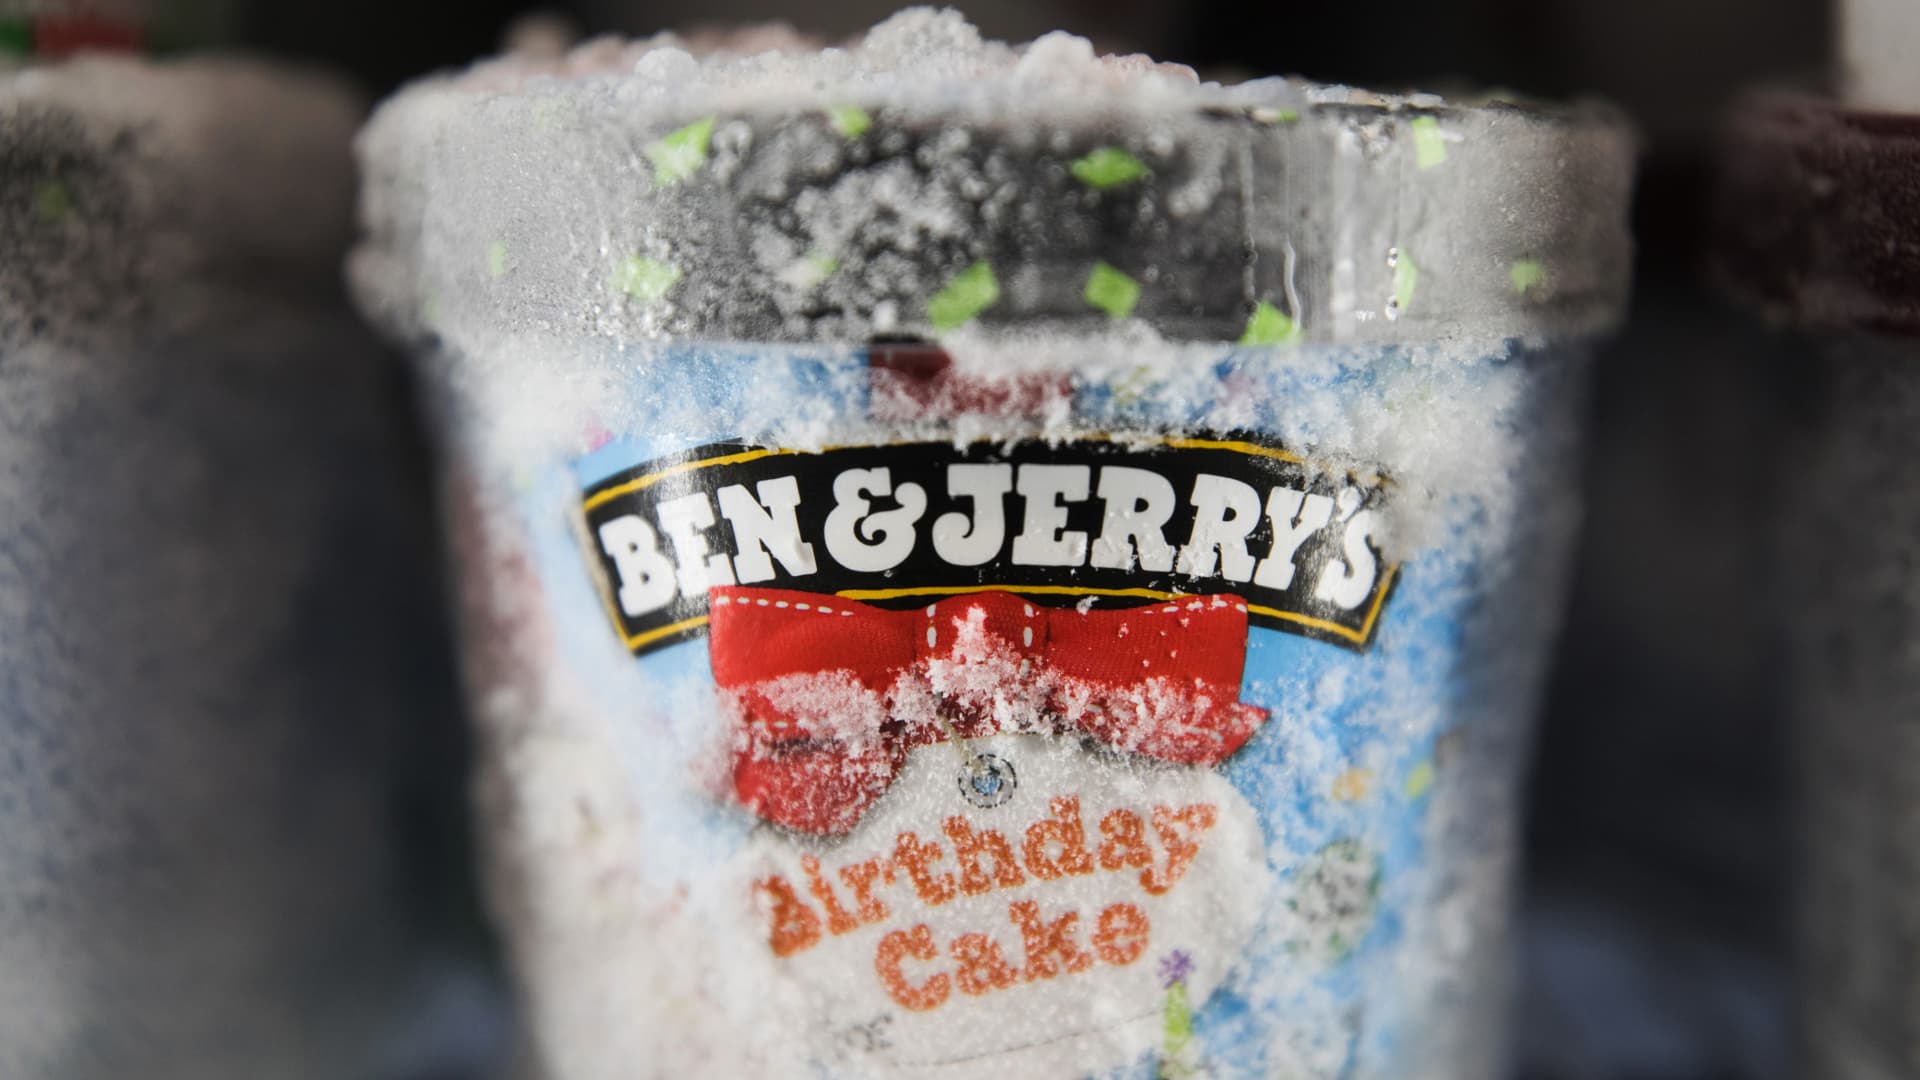 Ben & Jerry’s is suing the parent company Unilever for the sale of Israeli operations